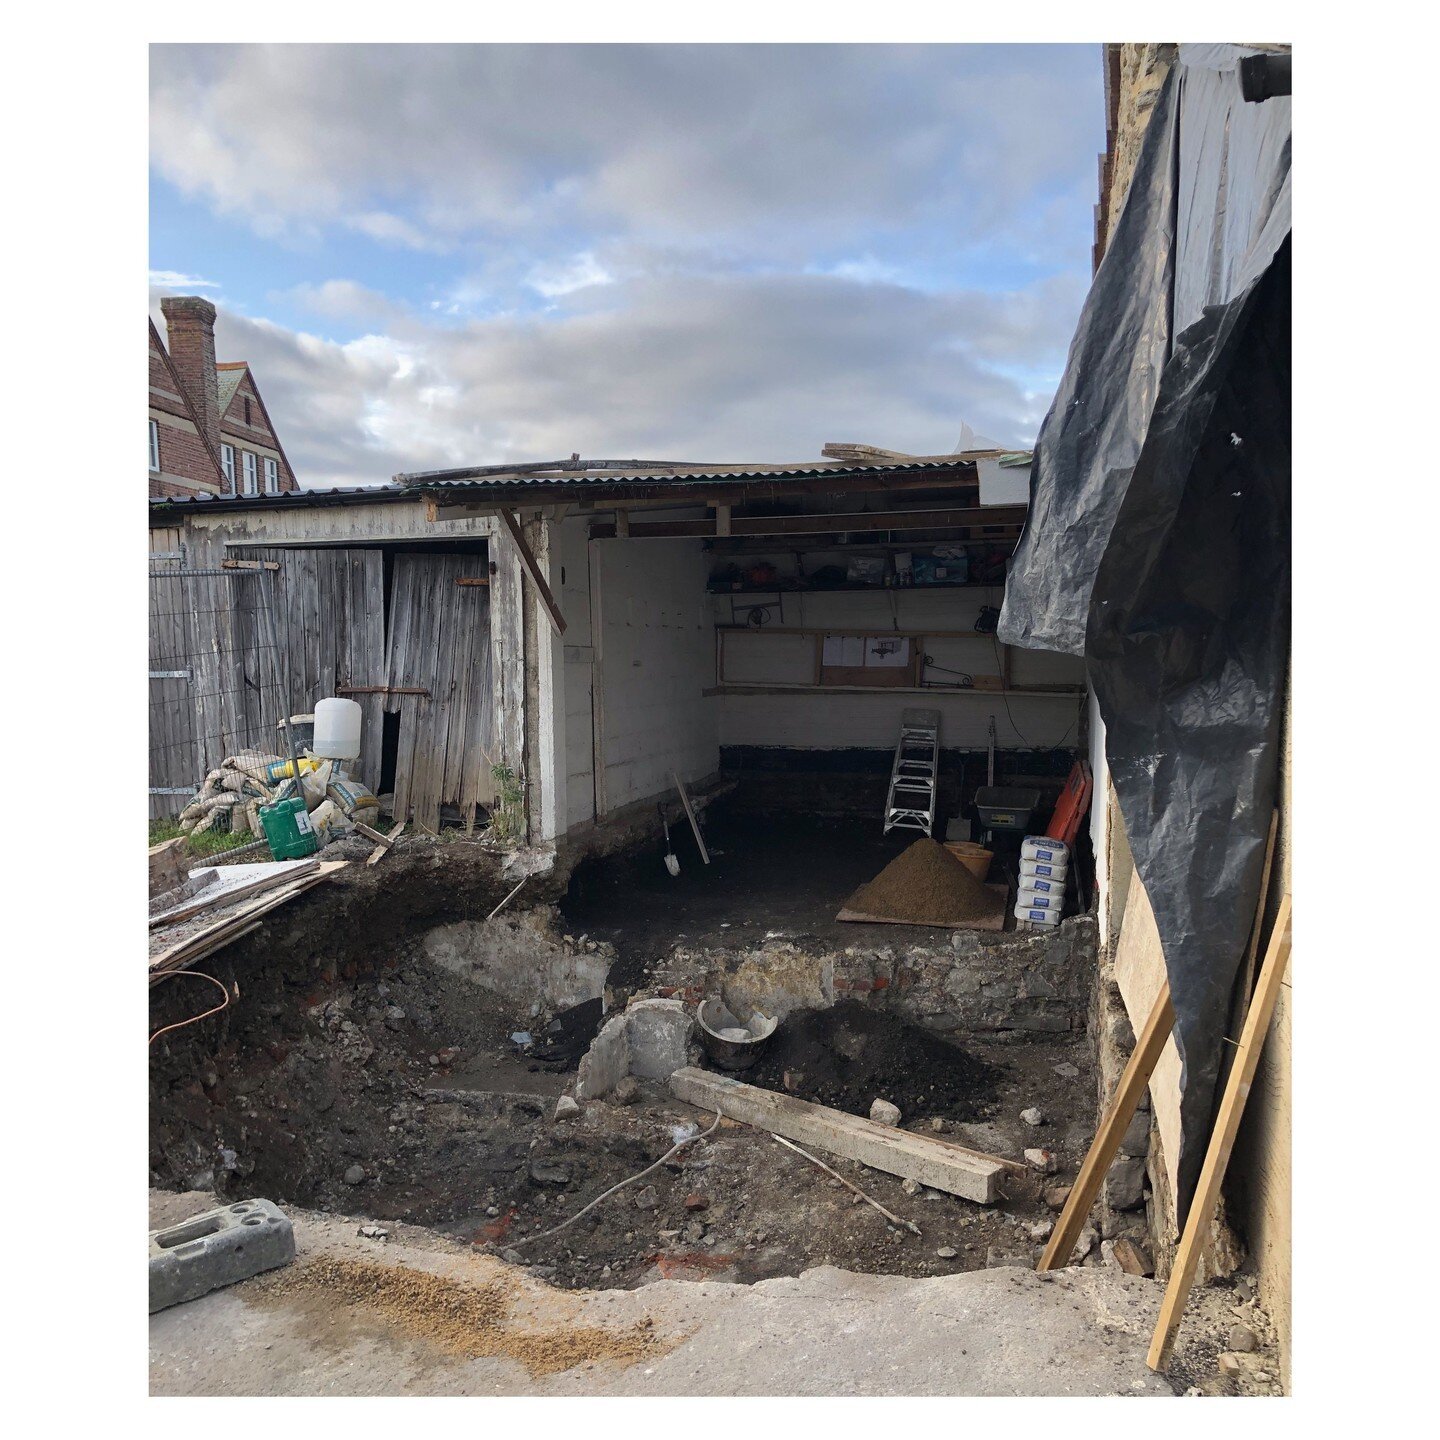 On site find part 2: A cellar, back filled with builder&rsquo;s waste; great! Two Lyme Regis Ol&rsquo; timers, on consecutive days stopped to talk to the ground works contractor currently working on a small back lot site near the centre of town. Firs